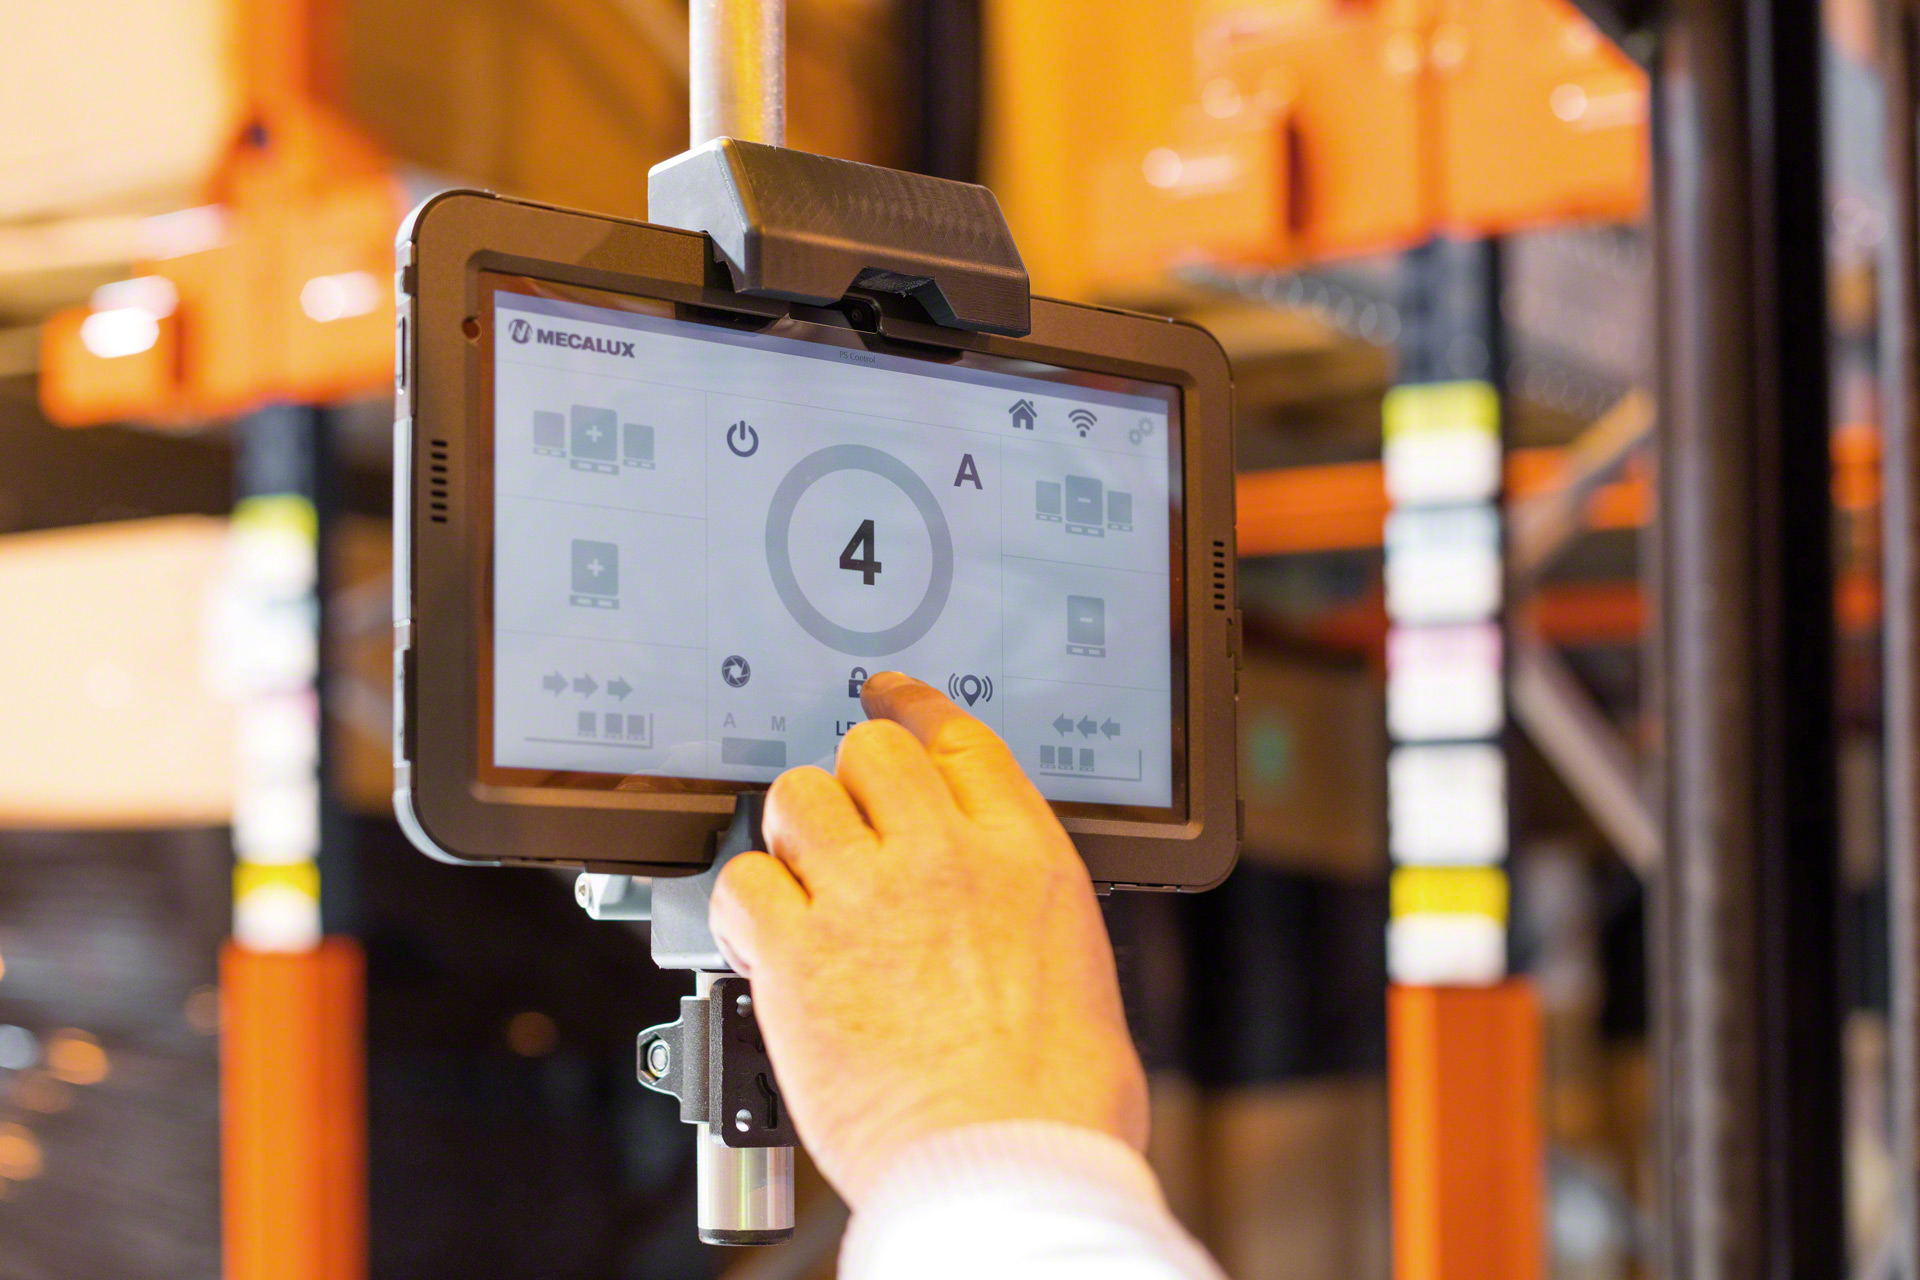 Pallet Shuttle system is remotely controlled via a Wi-Fi connected tablet